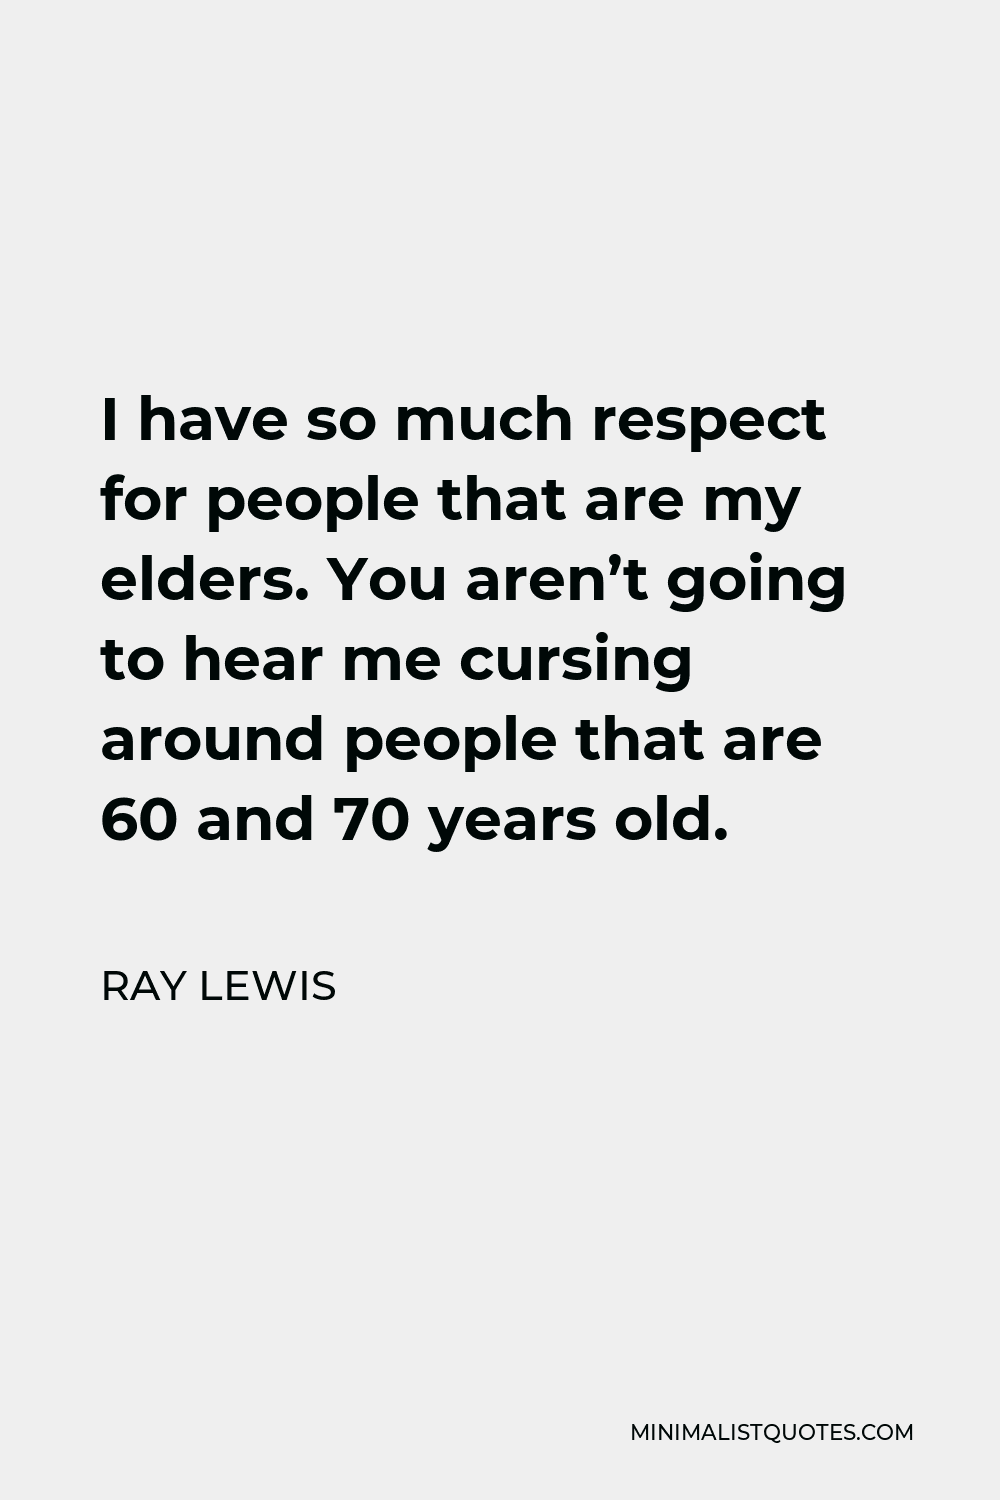 Ray Lewis Quote - I have so much respect for people that are my elders. You aren’t going to hear me cursing around people that are 60 and 70 years old.